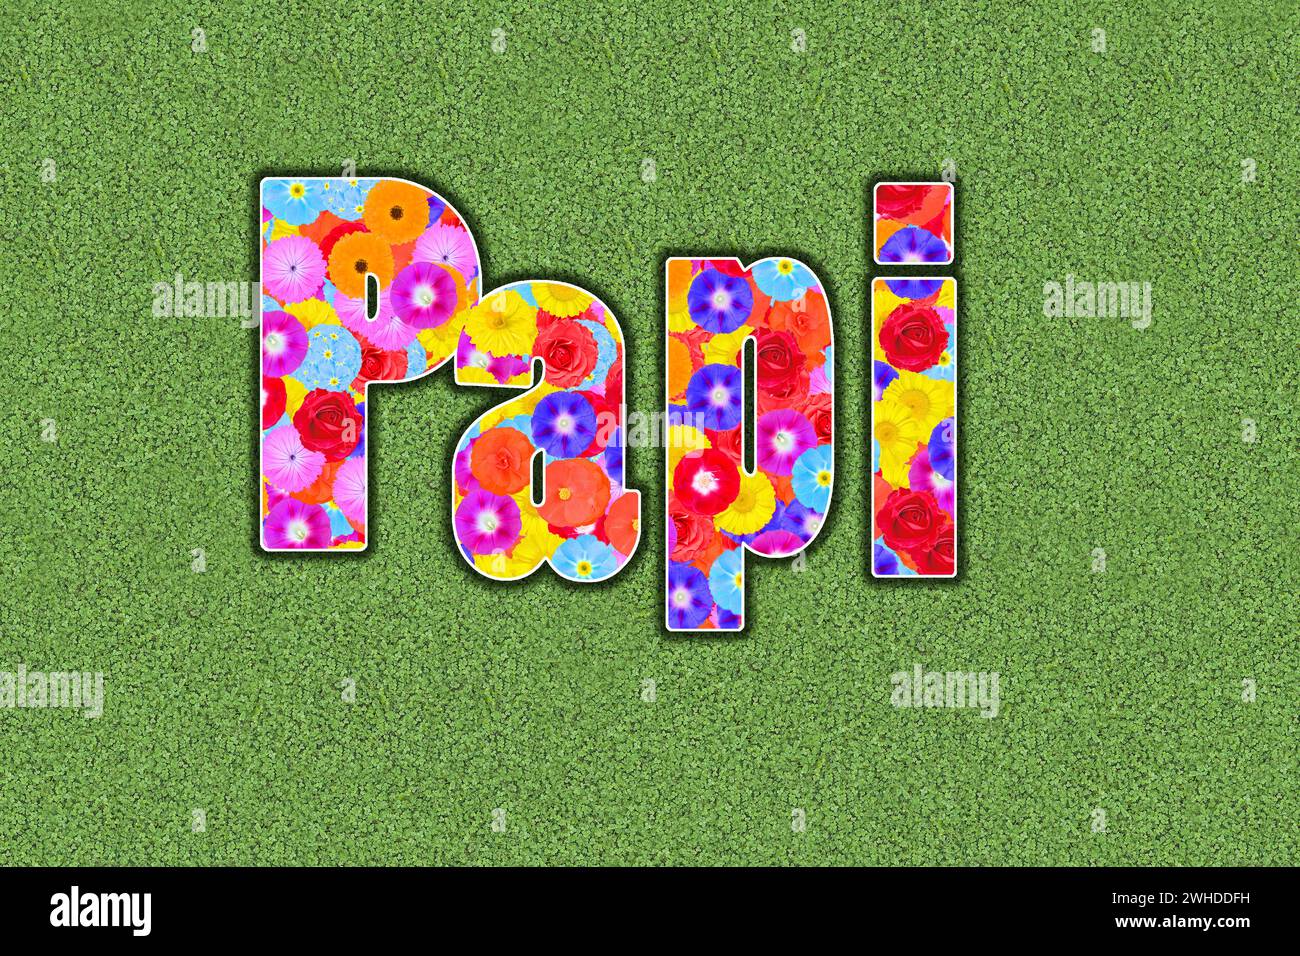 Word Papii with colourful flowerss, graphic design, illustration Stock Photo